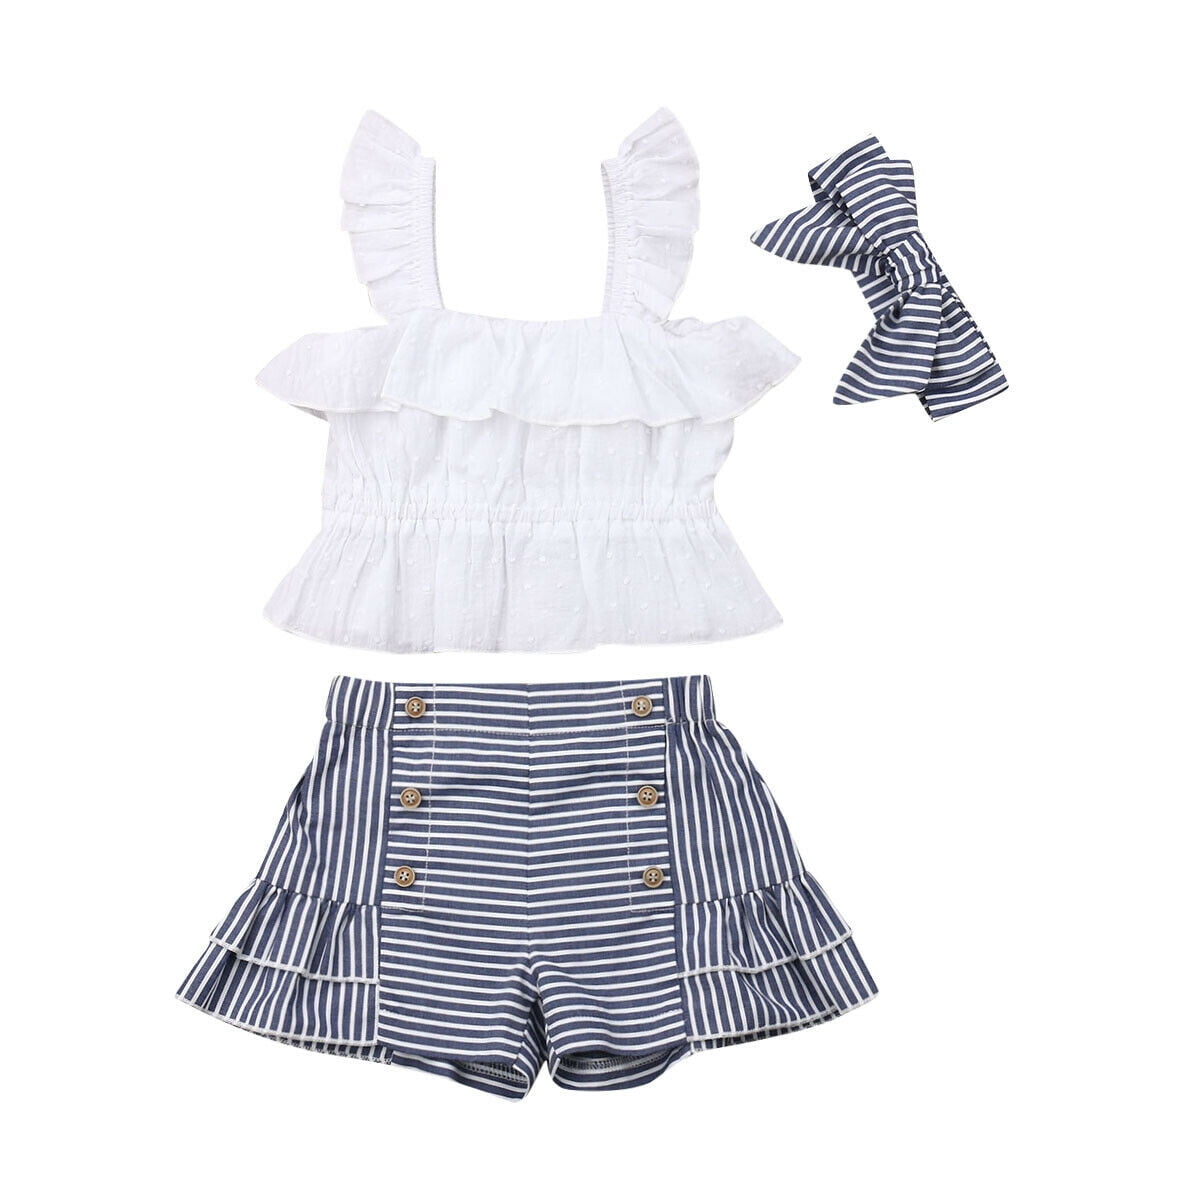 Toddler Baby Girls Sleeveless Pleated Crop Top+Striped Ruffle Shorts+Headband Outfits Summer 3 PCS Clothes Set